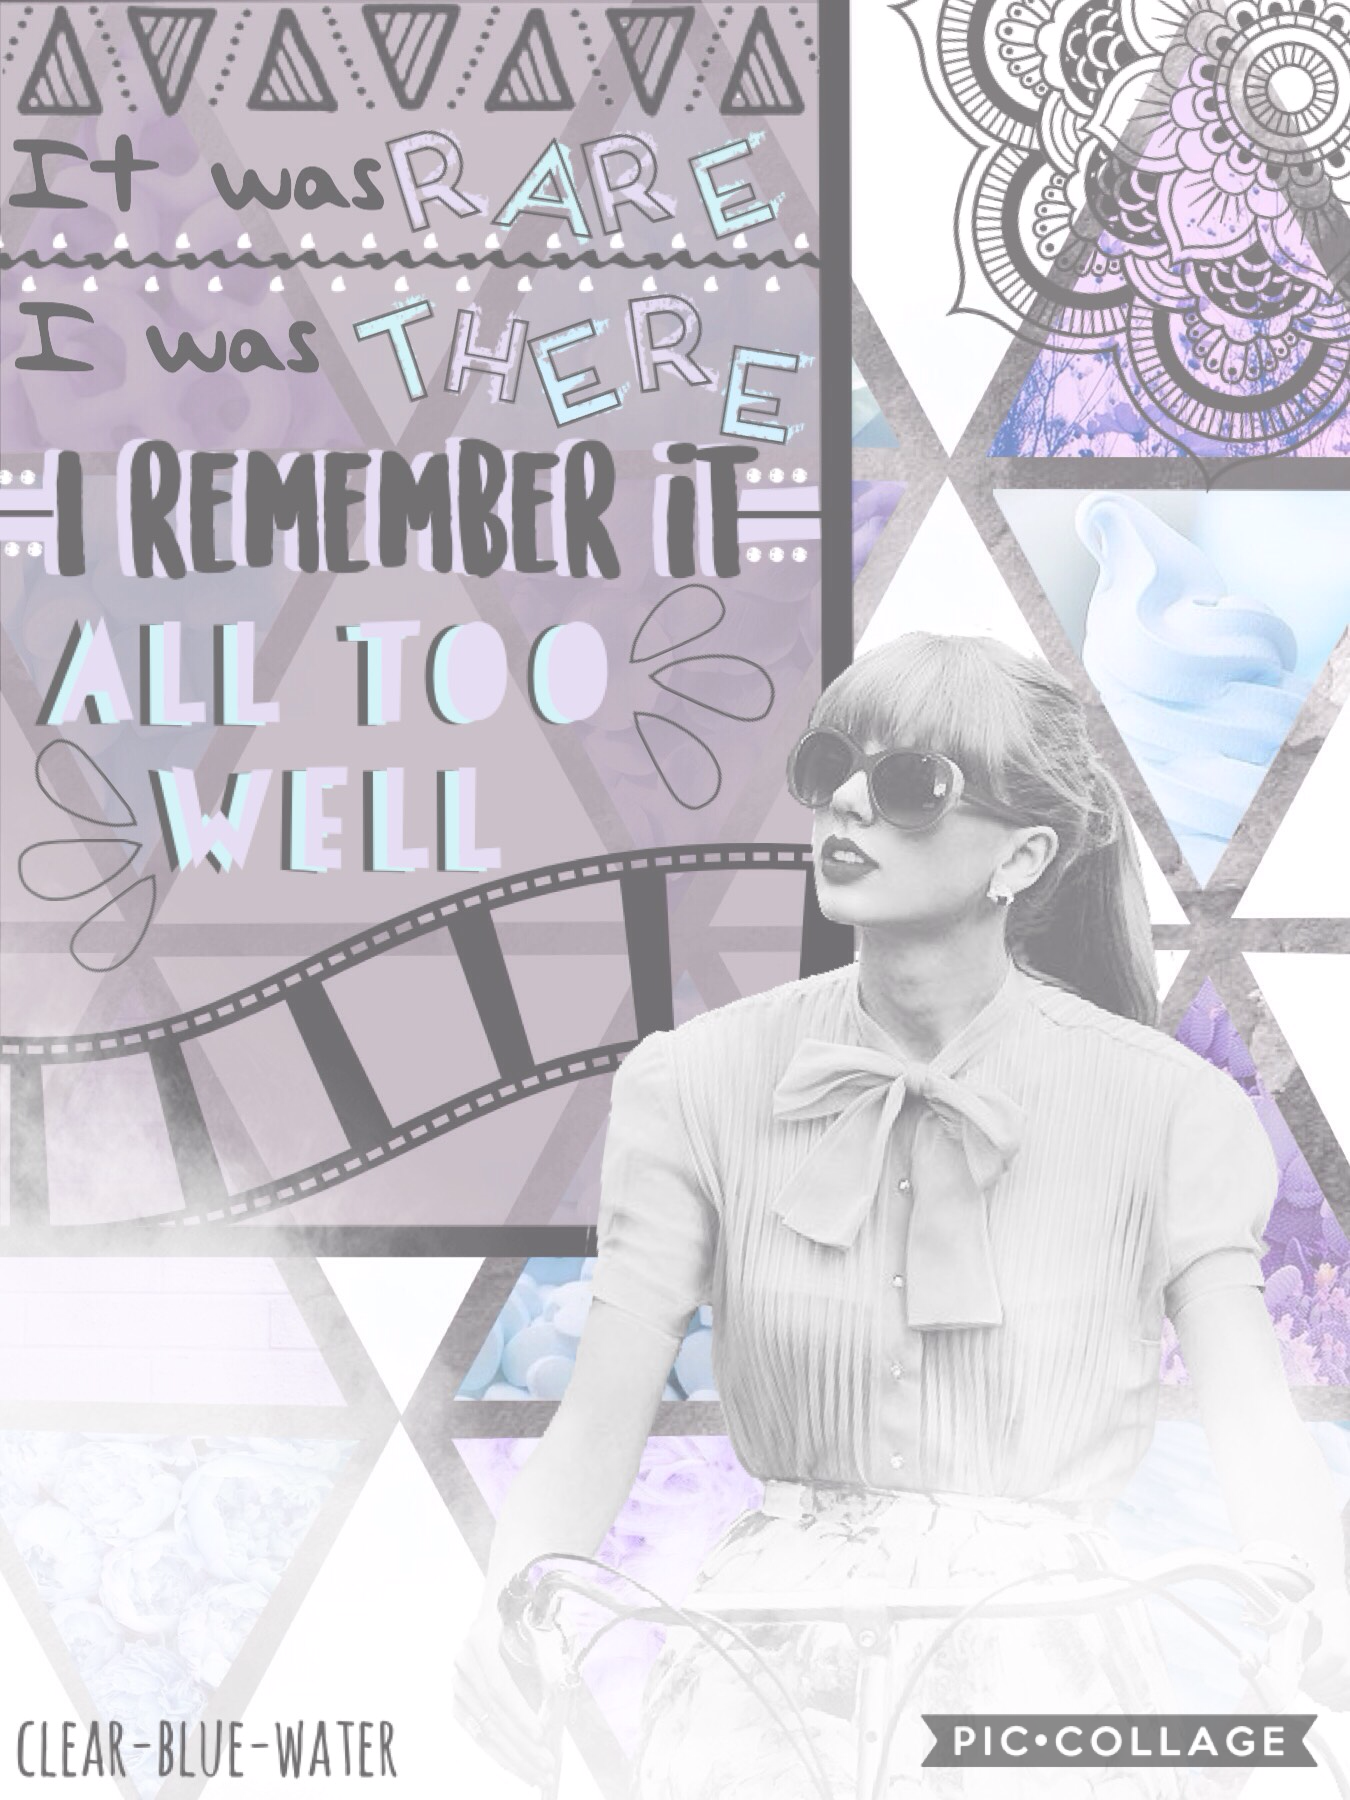 T A P
Made this for a games 
QOTD: Are you excited for ts7 to come out? (Sorry for stealing this Audrey😂)
AOTD: Yasssssss!!!!! 
Also even though this is t a Reputation era lyric I kinda made this for the end of the Reputation era so my sad speech will be 